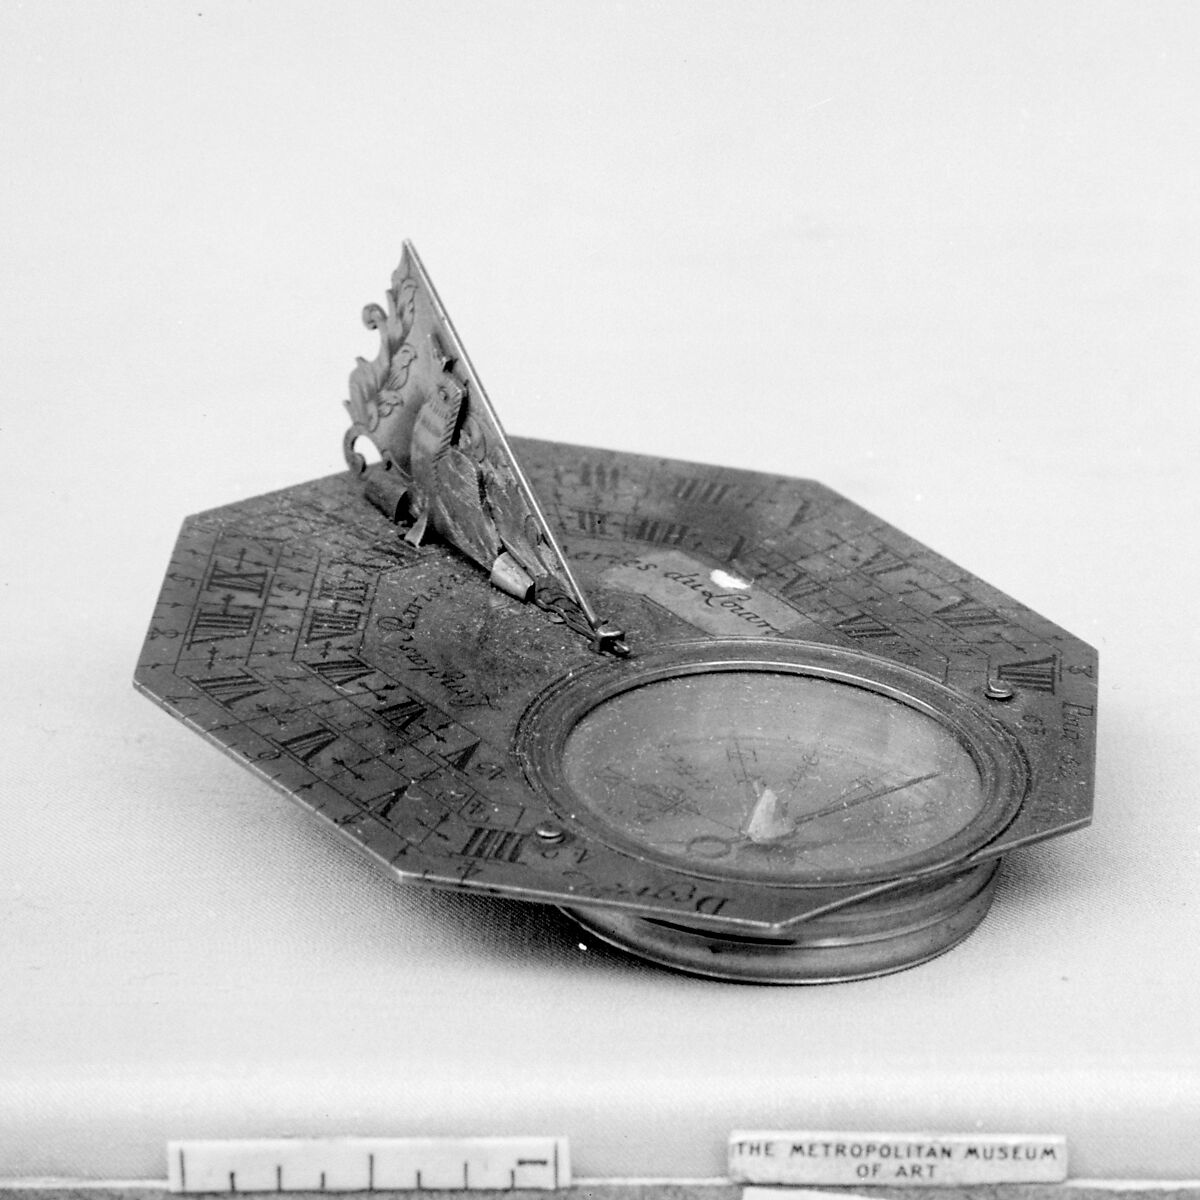 Portable horizontal sundial, Claude Langlois (French, working 1730–57, died before 1760), Brass and copper alloy, French, Paris 